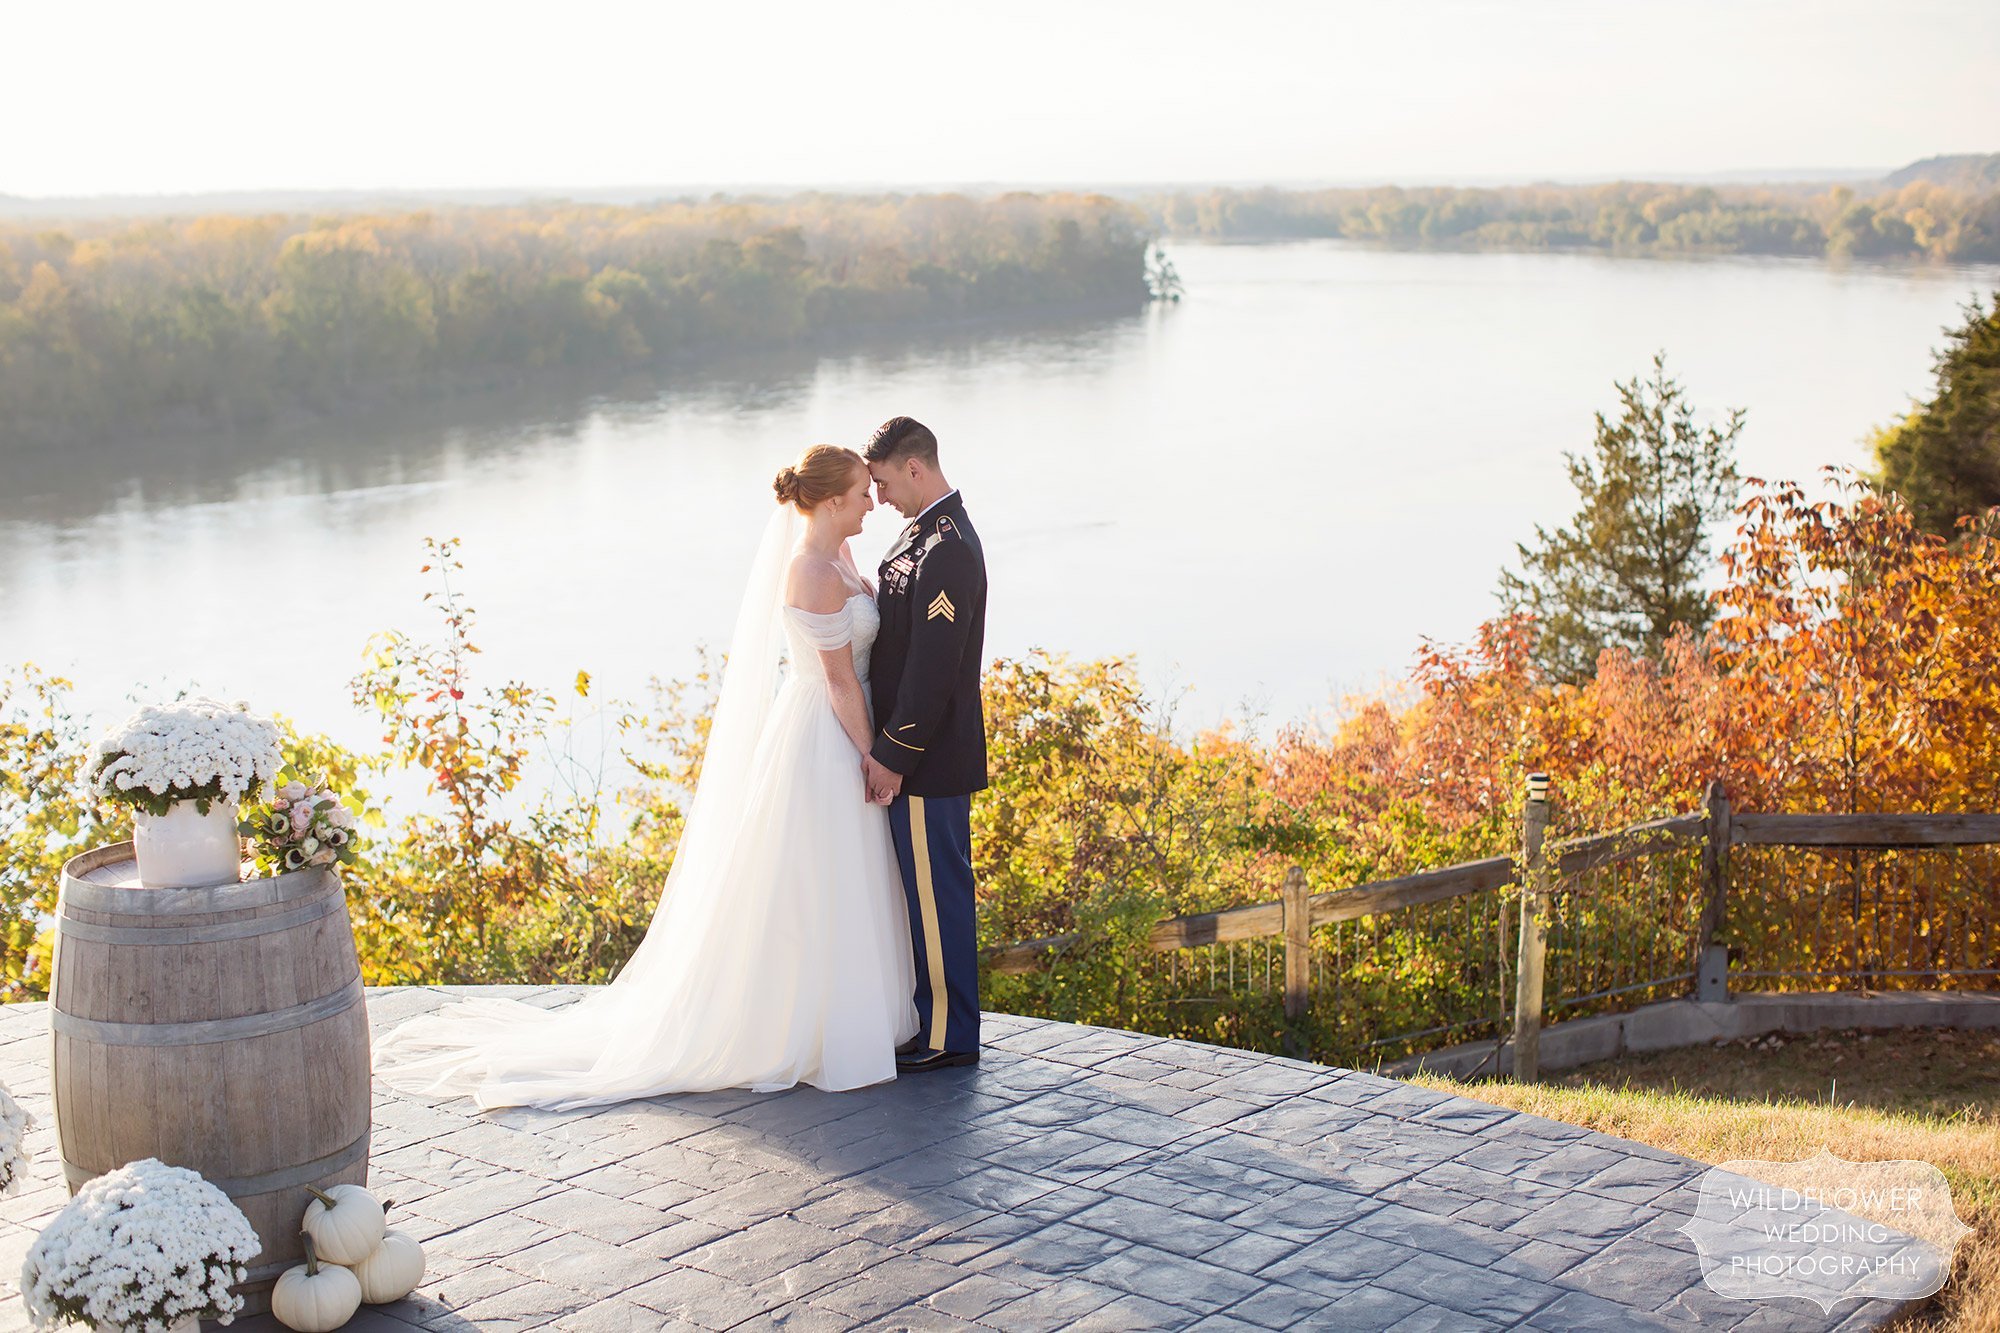 The bride and groom stand on the blufftop overlooking the river at this Les Bourgeois October wedding.